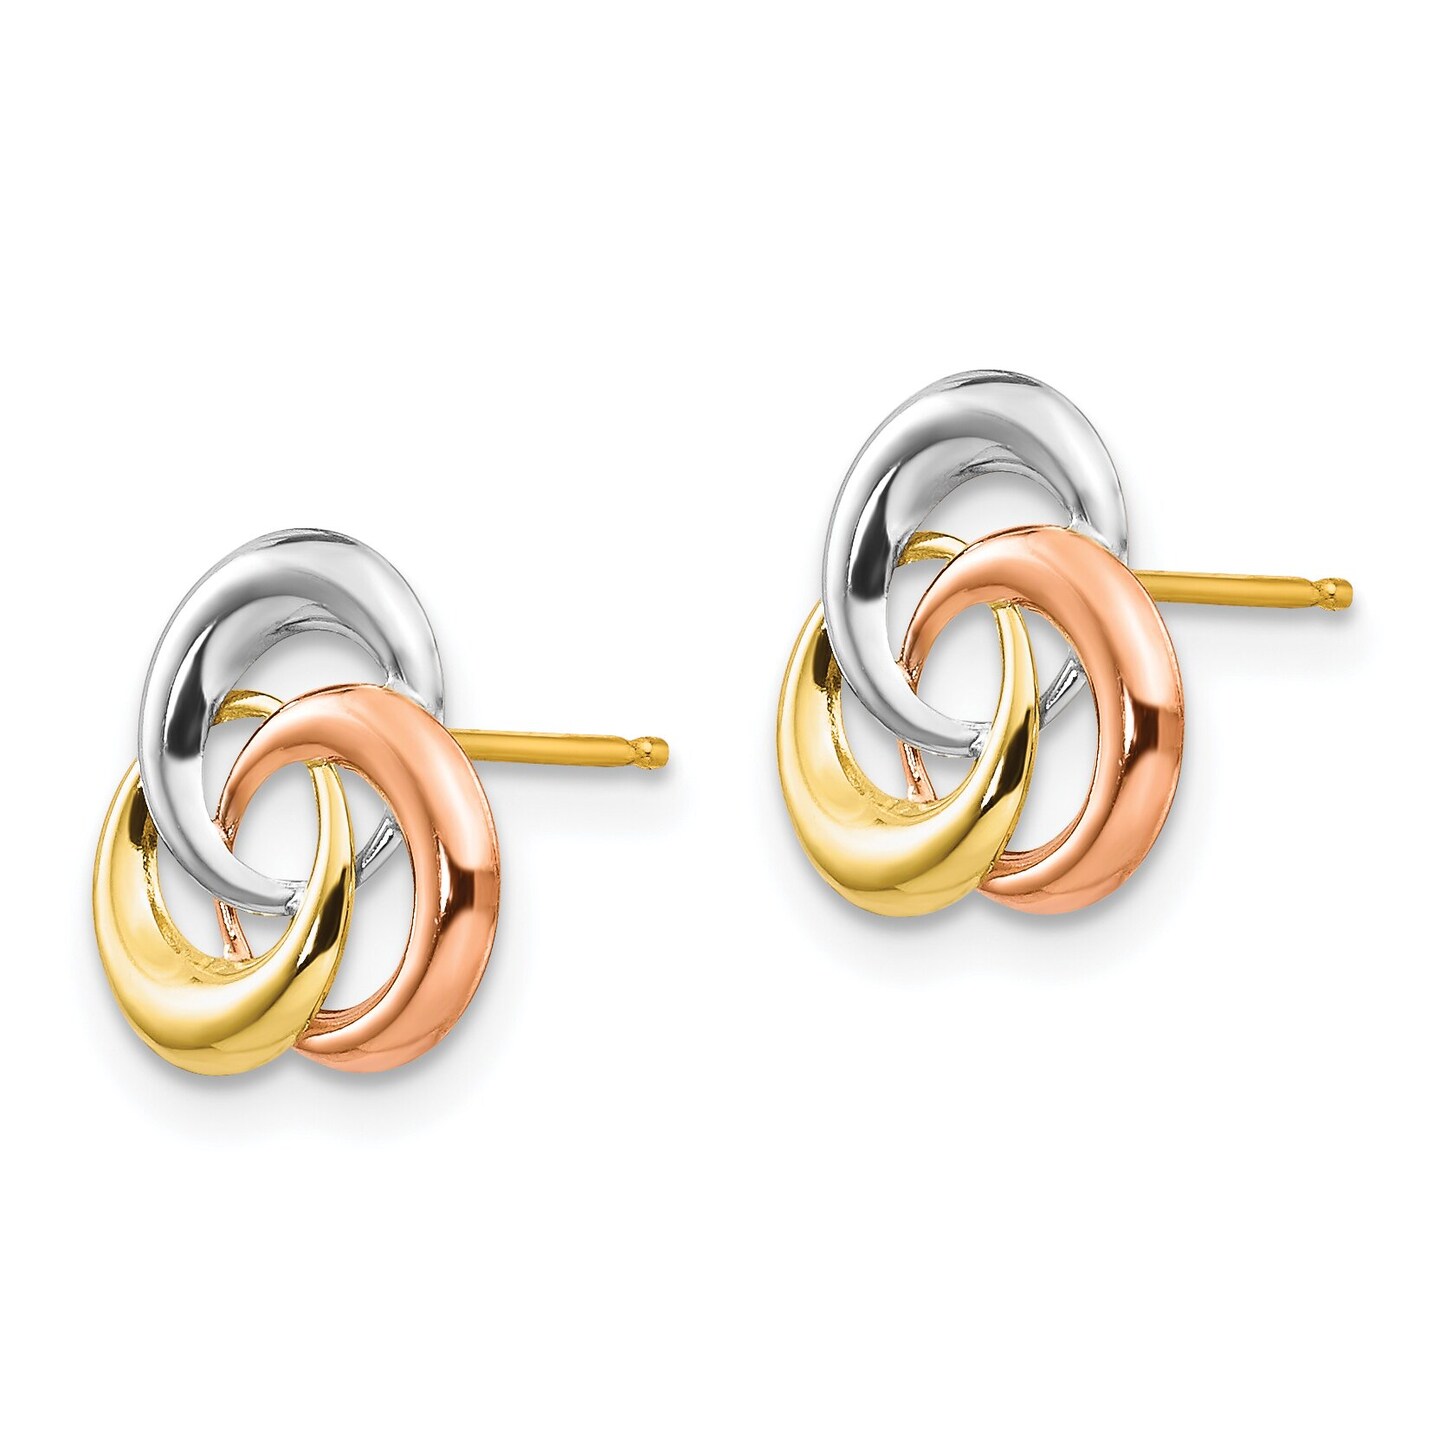 14K Gold Tri Color 3 Circle Stud Earrings Jewelry 10mm x 10mm